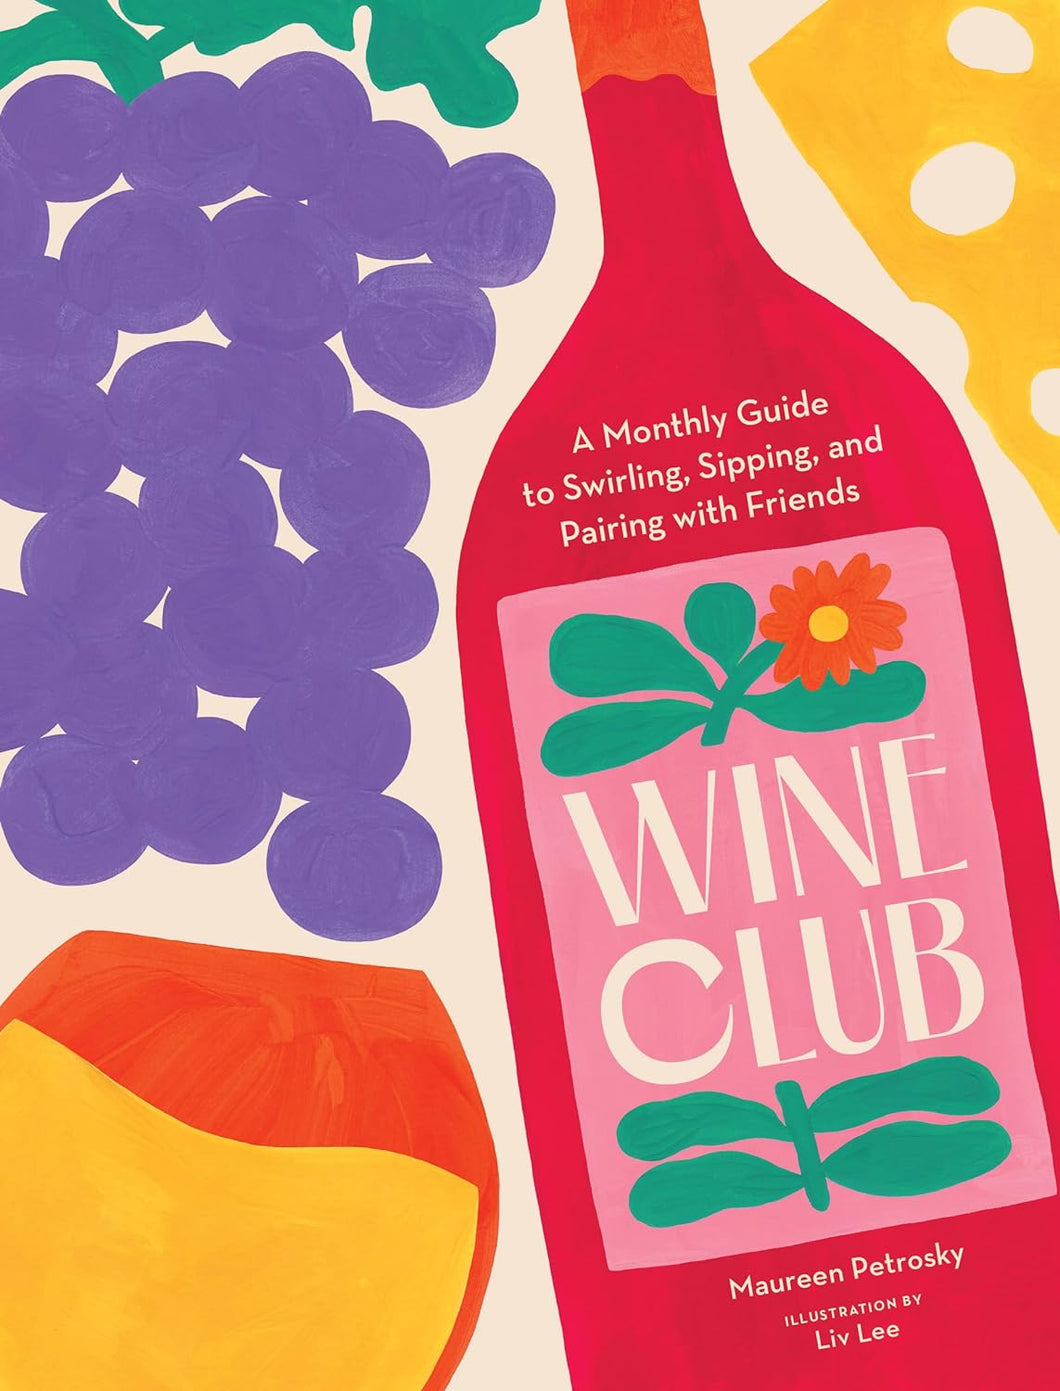 Wine Club: A Monthly Guide to Swirling, Sipping, and Pairing with Friends by Maureen Petrosky